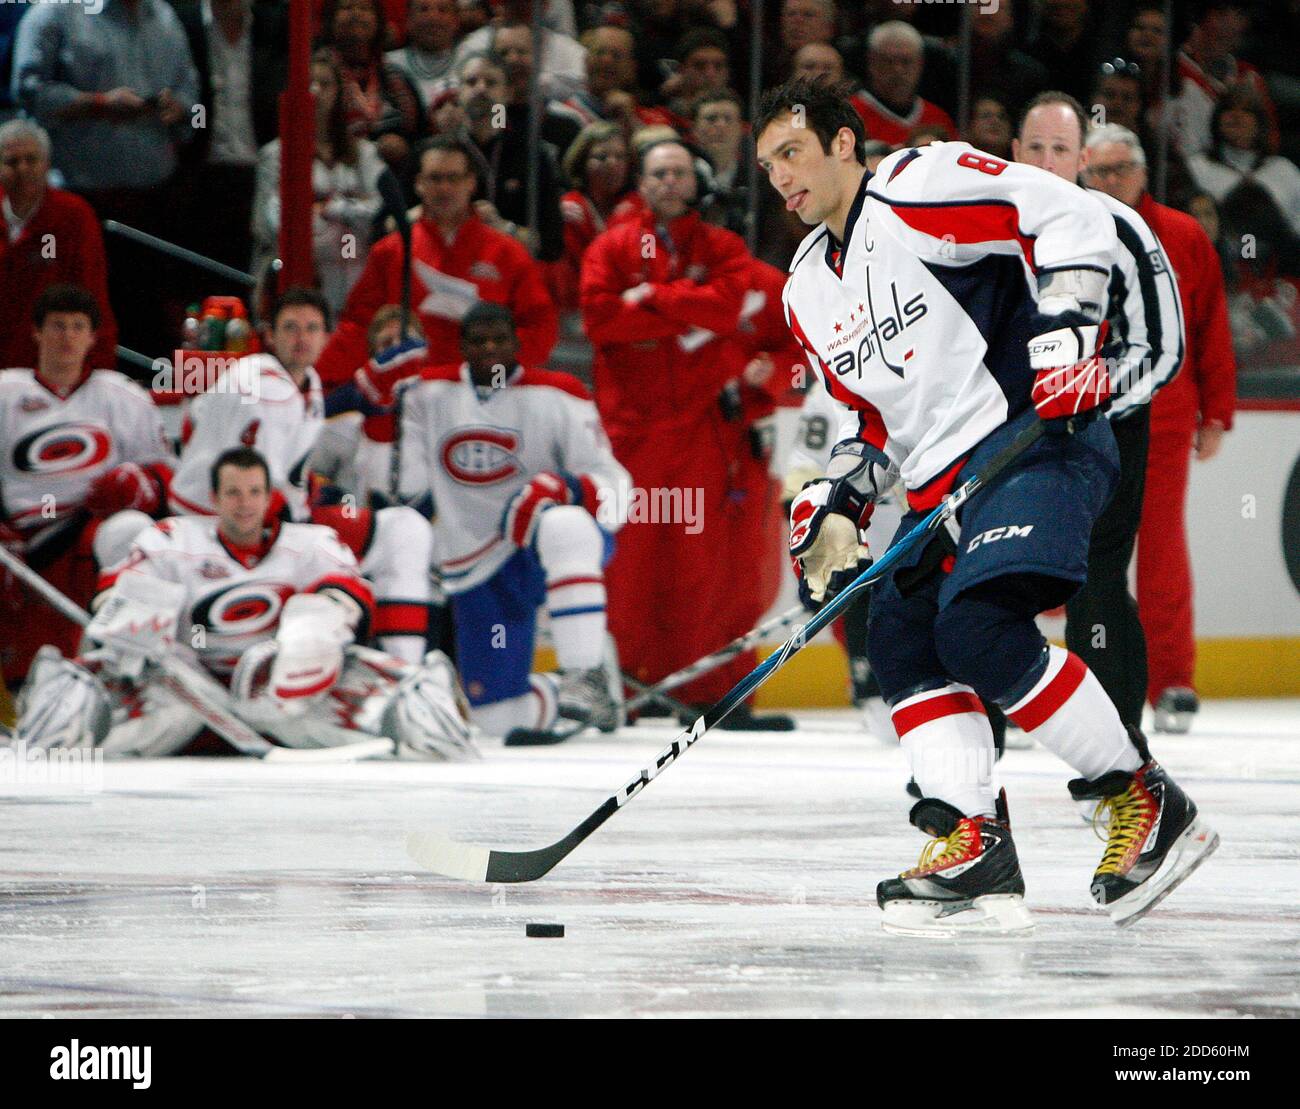 NO FILM, NO VIDEO, NO TV, NO DOCUMENTARY - Alex Ovechkin, of the Washington Capitals, sticks out his tongue as he gets ready to shoot in the Breakaway Challenge competition during the Skills Competition of the NHL All-Star Game at the RBC Center in Raleigh, North Carolina, USA on January 29, 2011. Photo by Chris Seward/Raleigh News & Observer/MCT/ABACAPRESS.COM Stock Photo